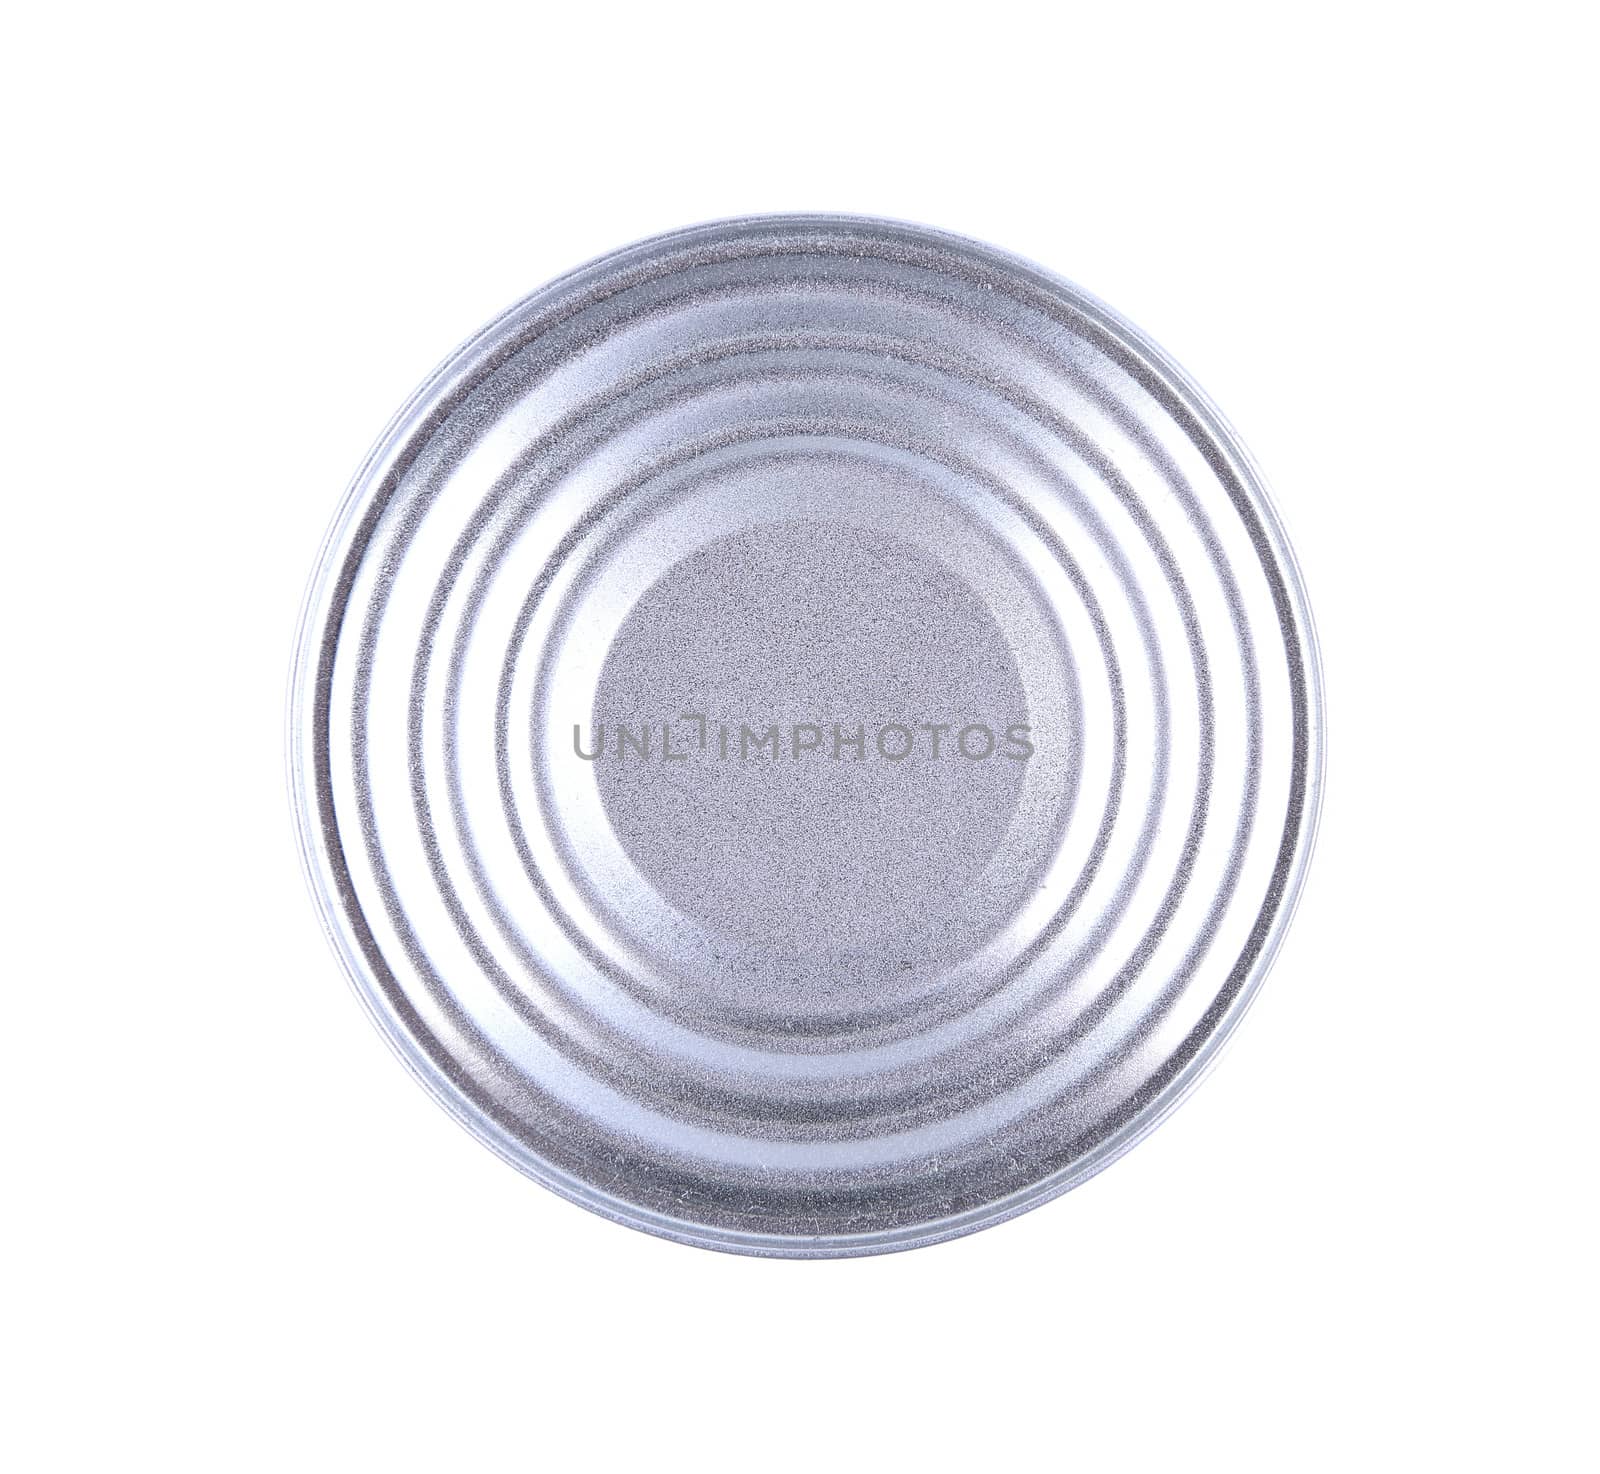 canned food isolated close-up by indigolotos